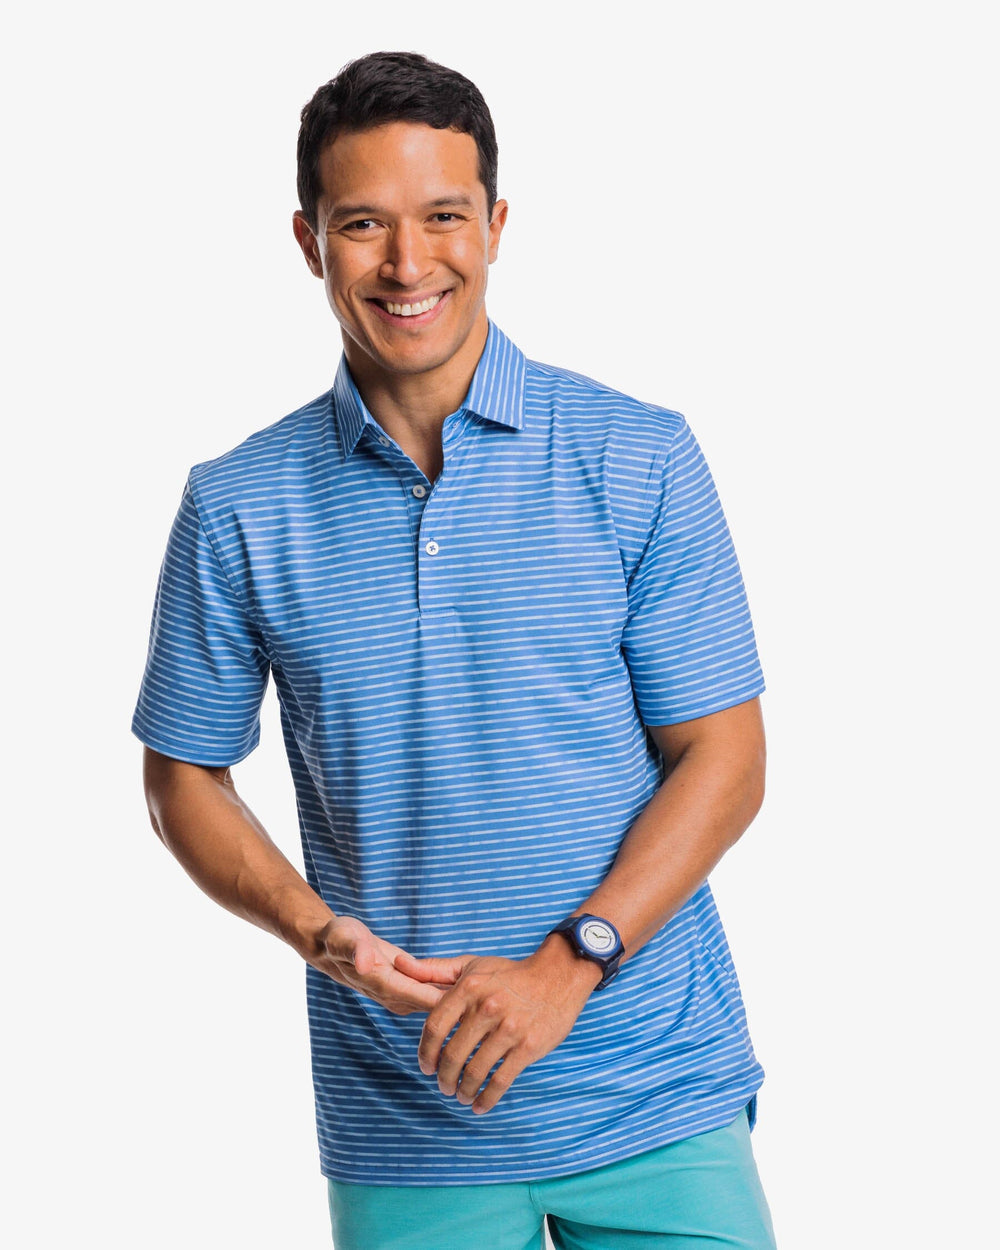 The front view of the Southern Tide Driver Wymberly Stripe Performance Polo Shirt by Southern Tide - Atlantic Blue